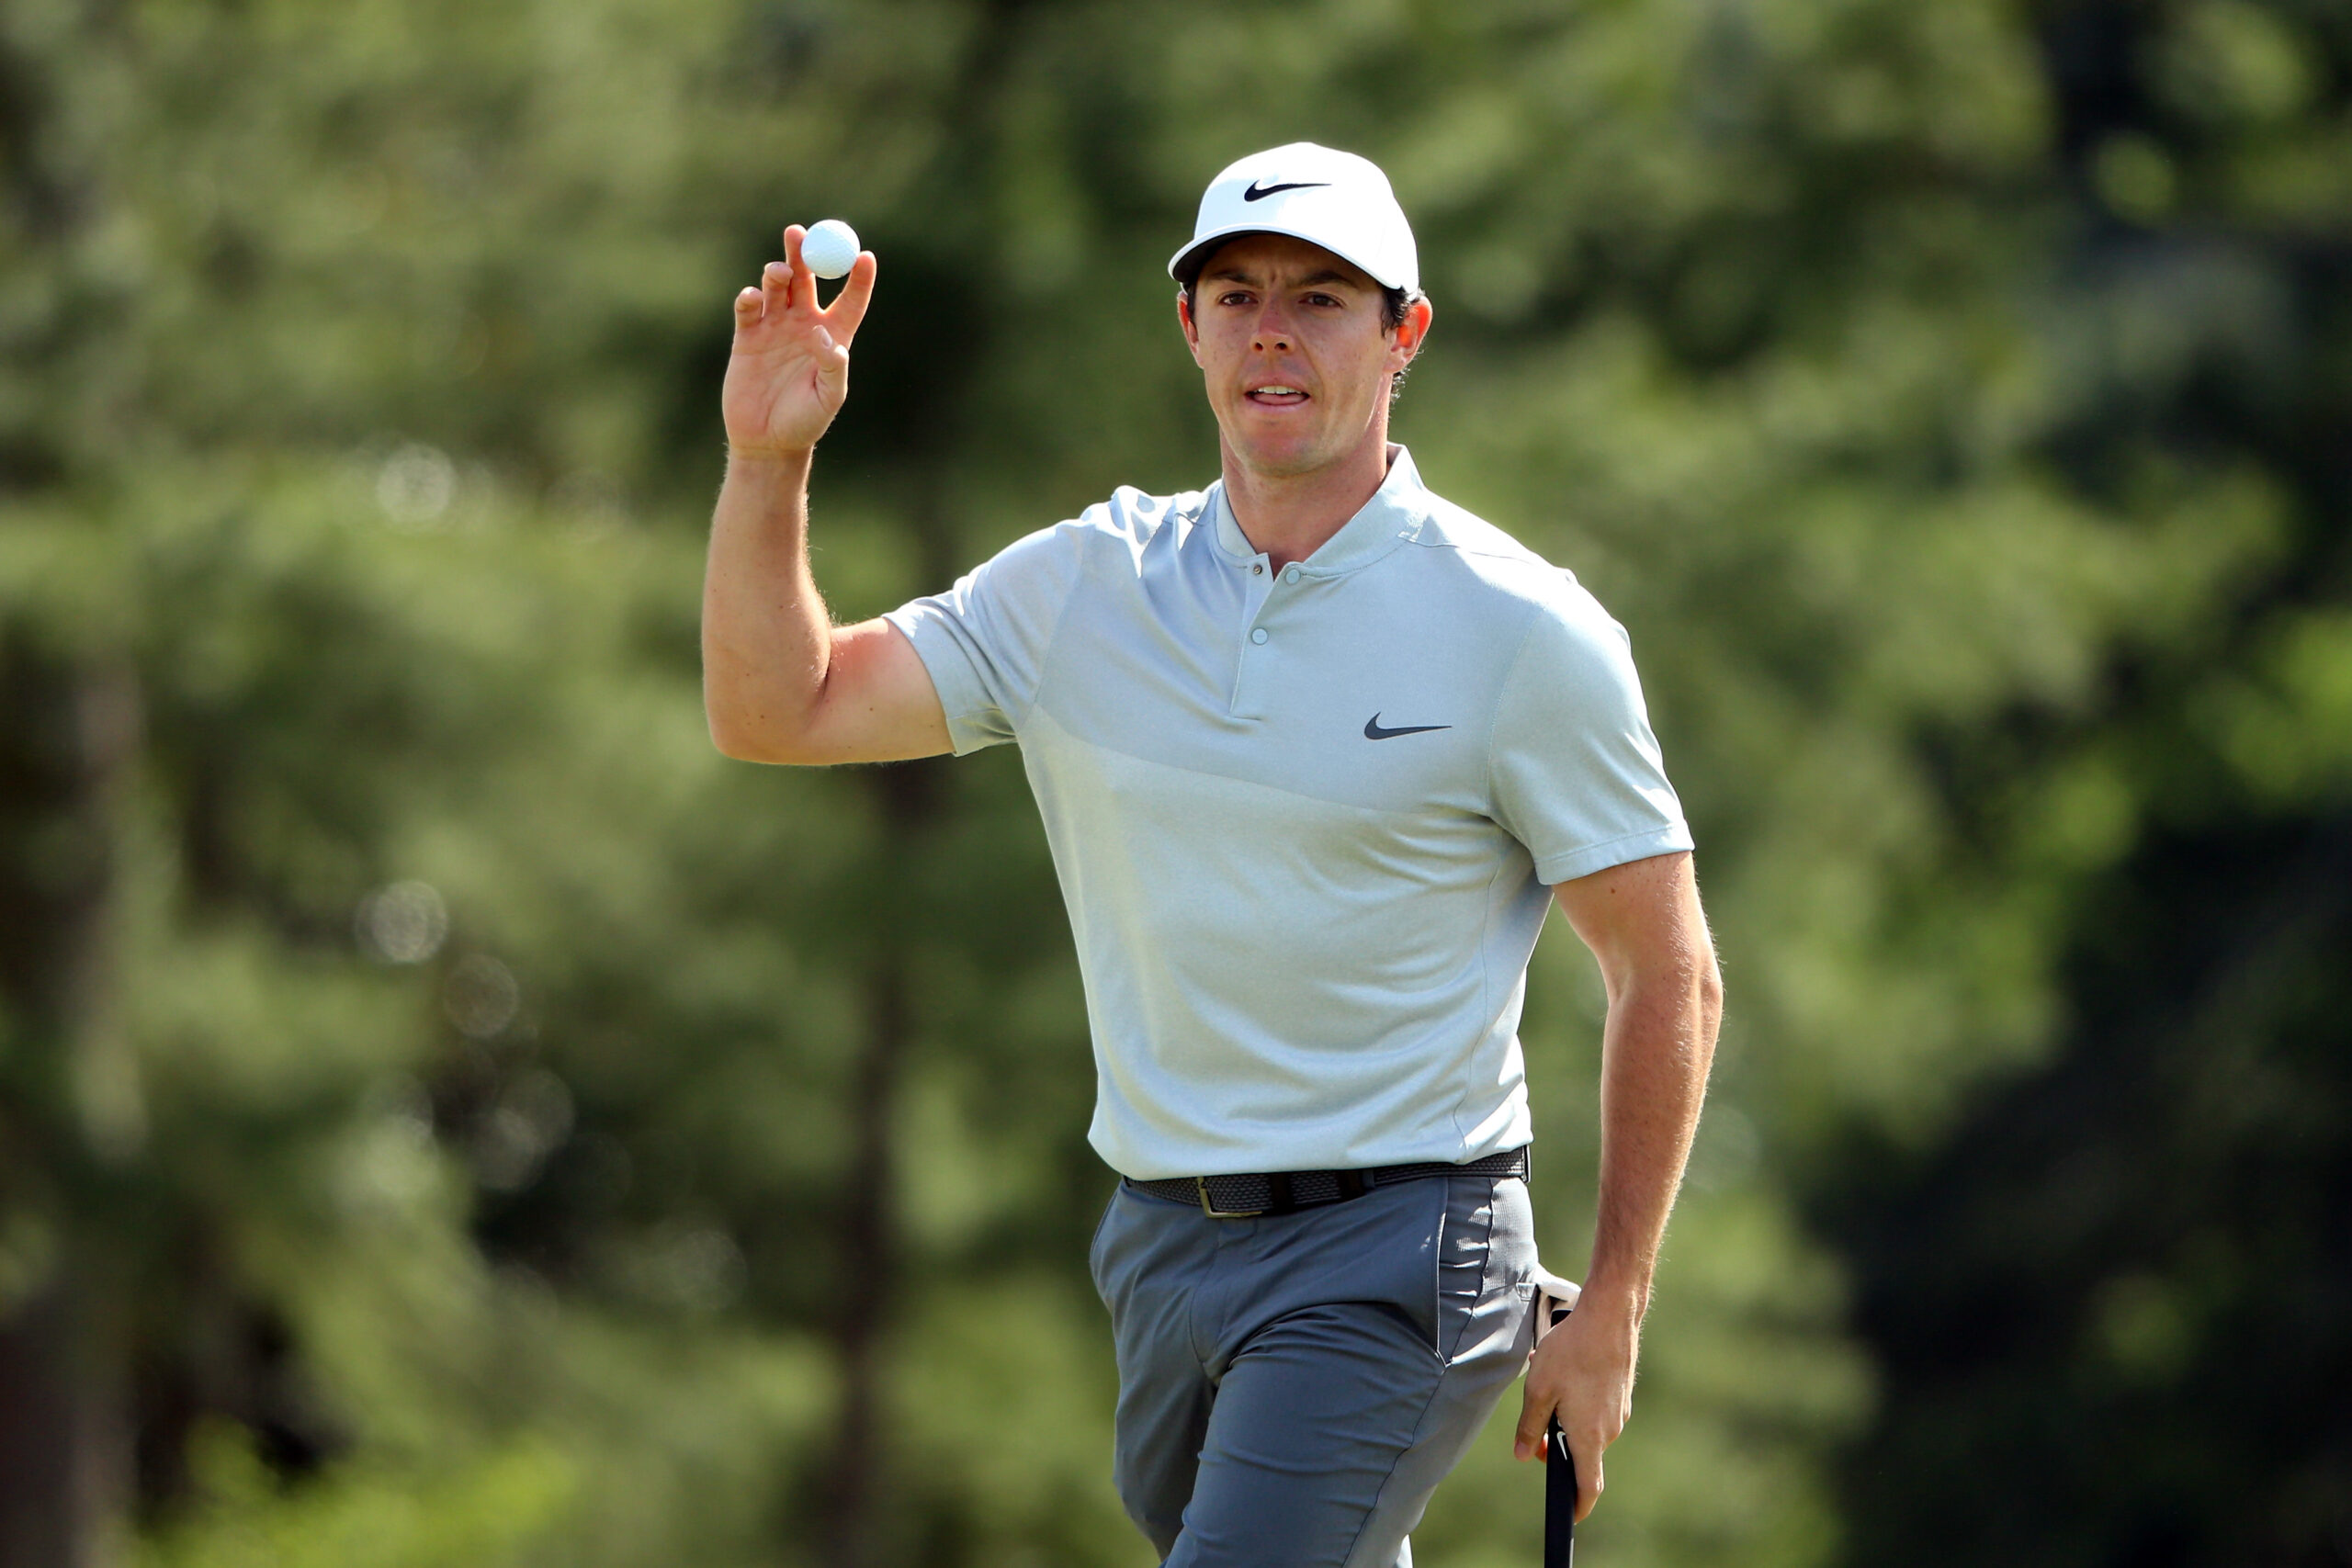 Masters 2016: Rory McIlroy closes the gap on Jordan Spieth after round two